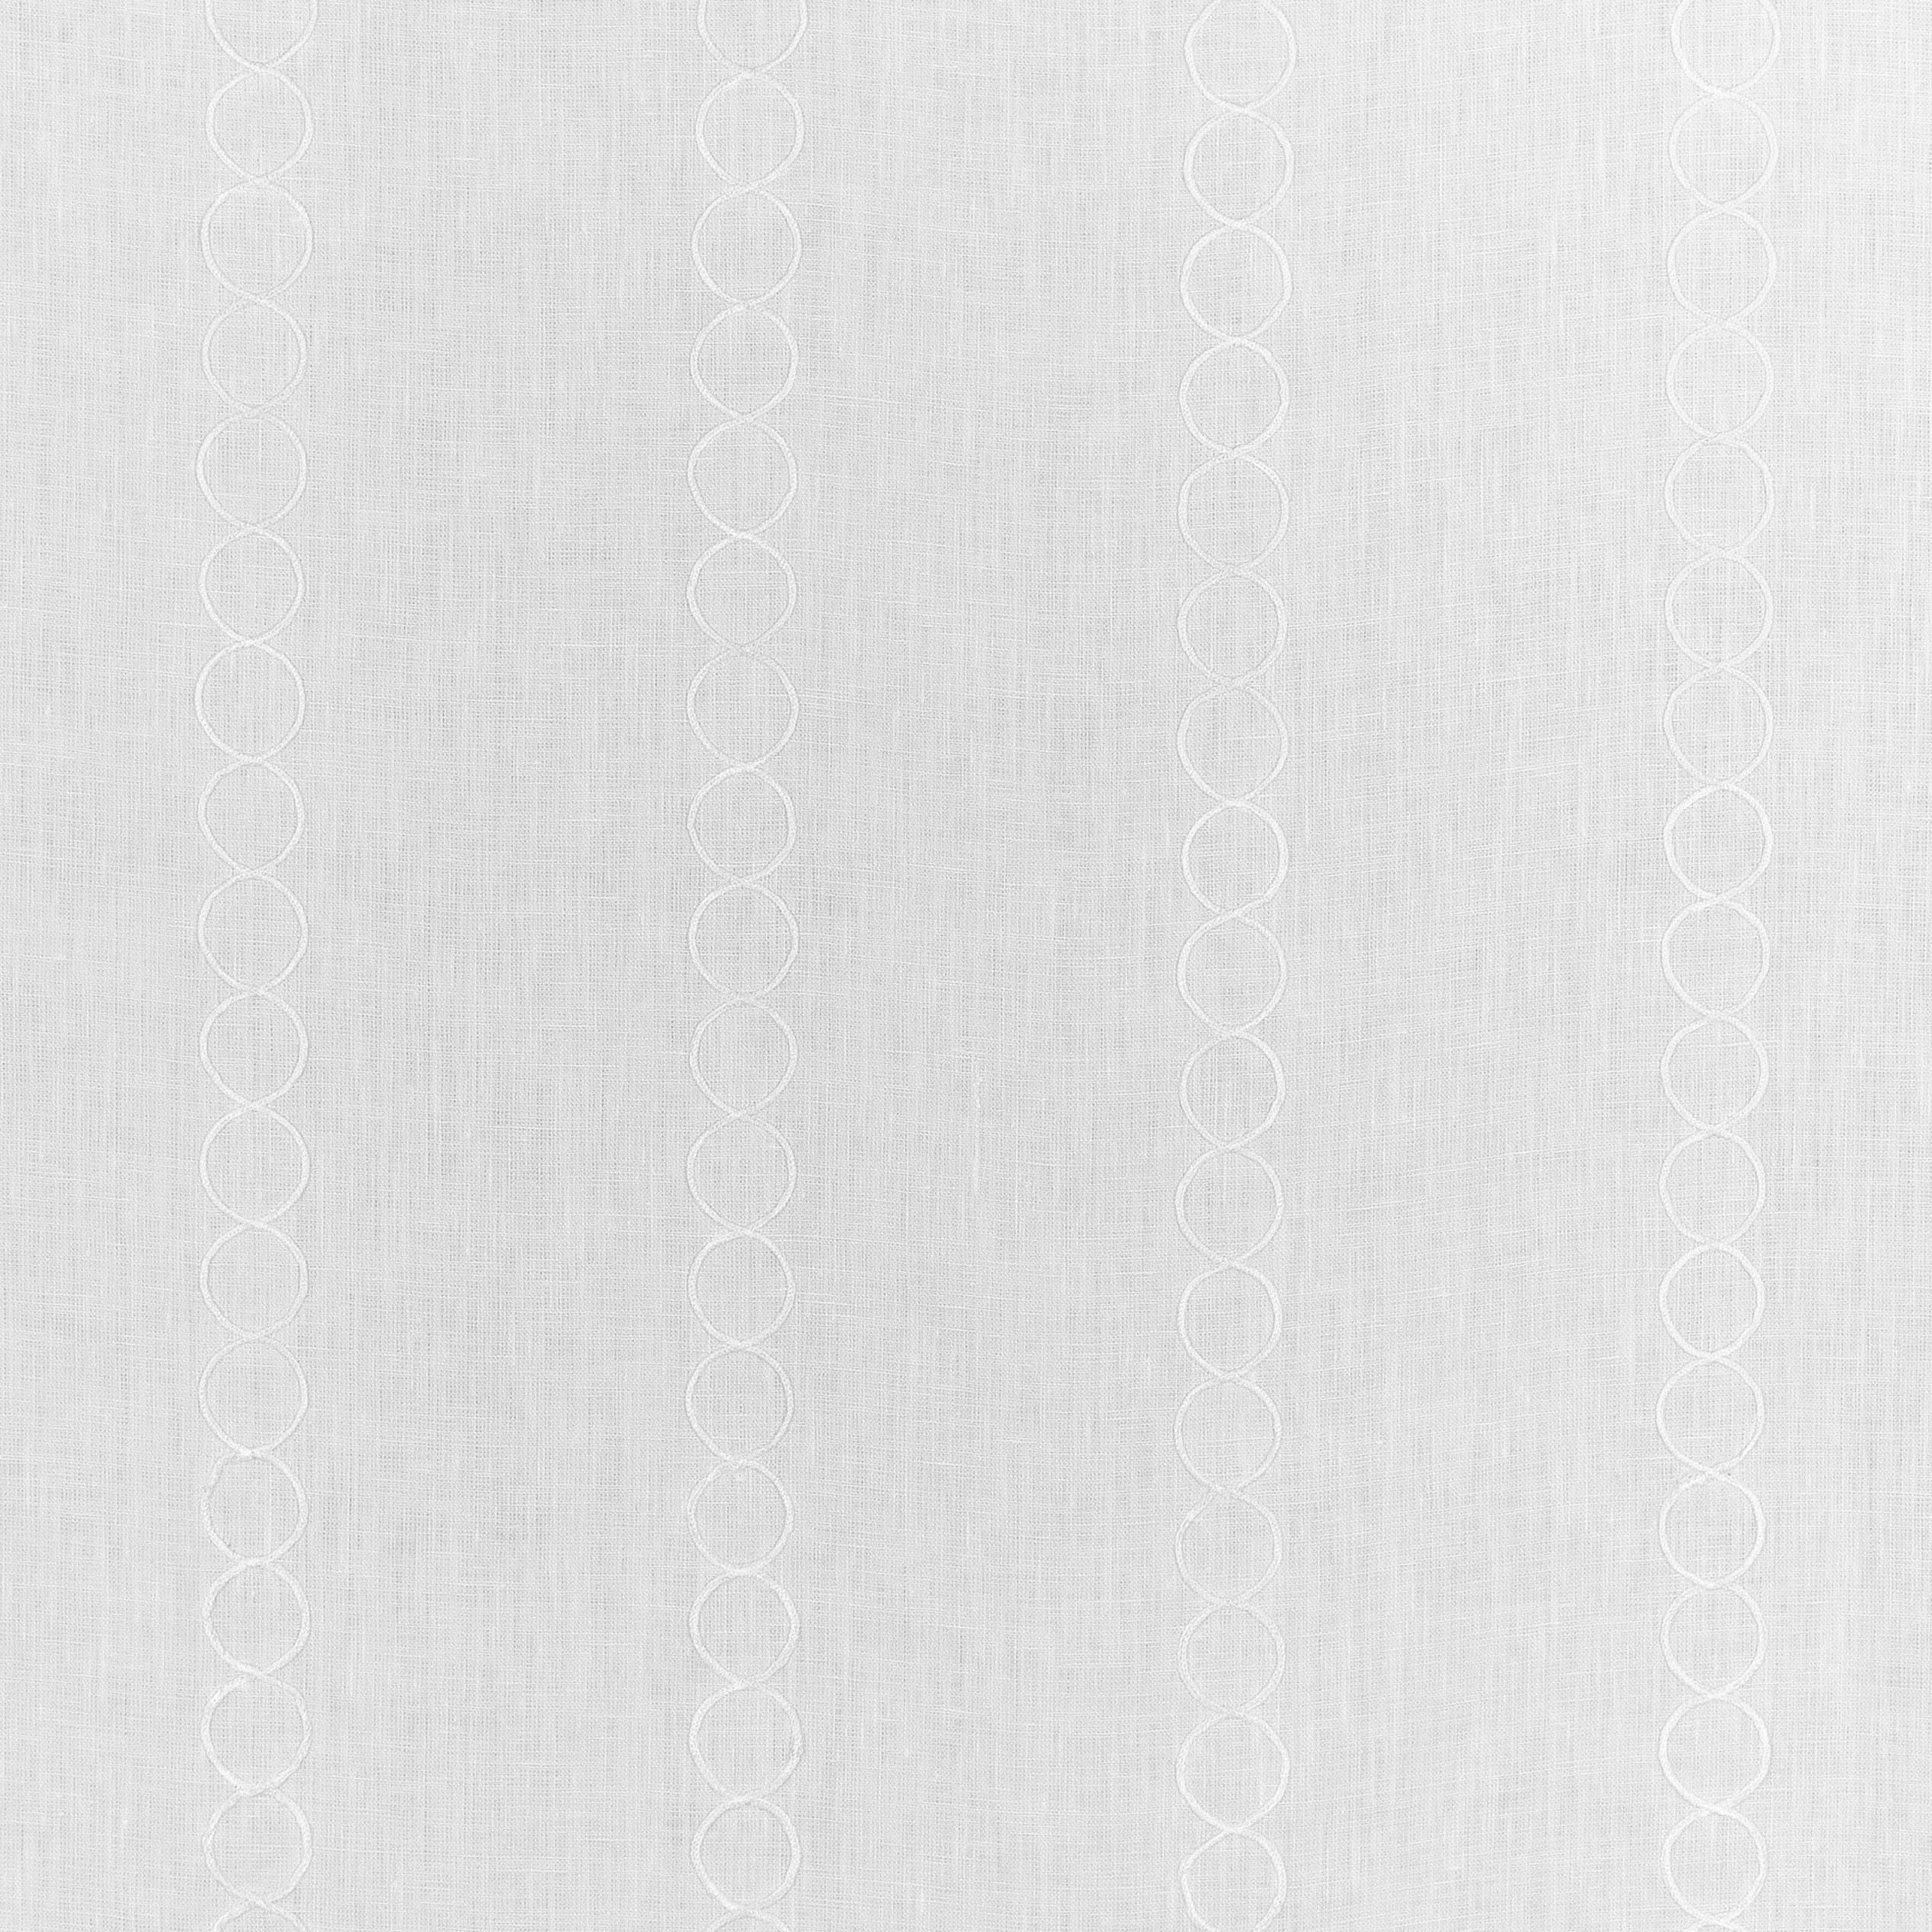 Rings fabric in white color - pattern number AW9117 - by Anna French in the Natural Glimmer collection